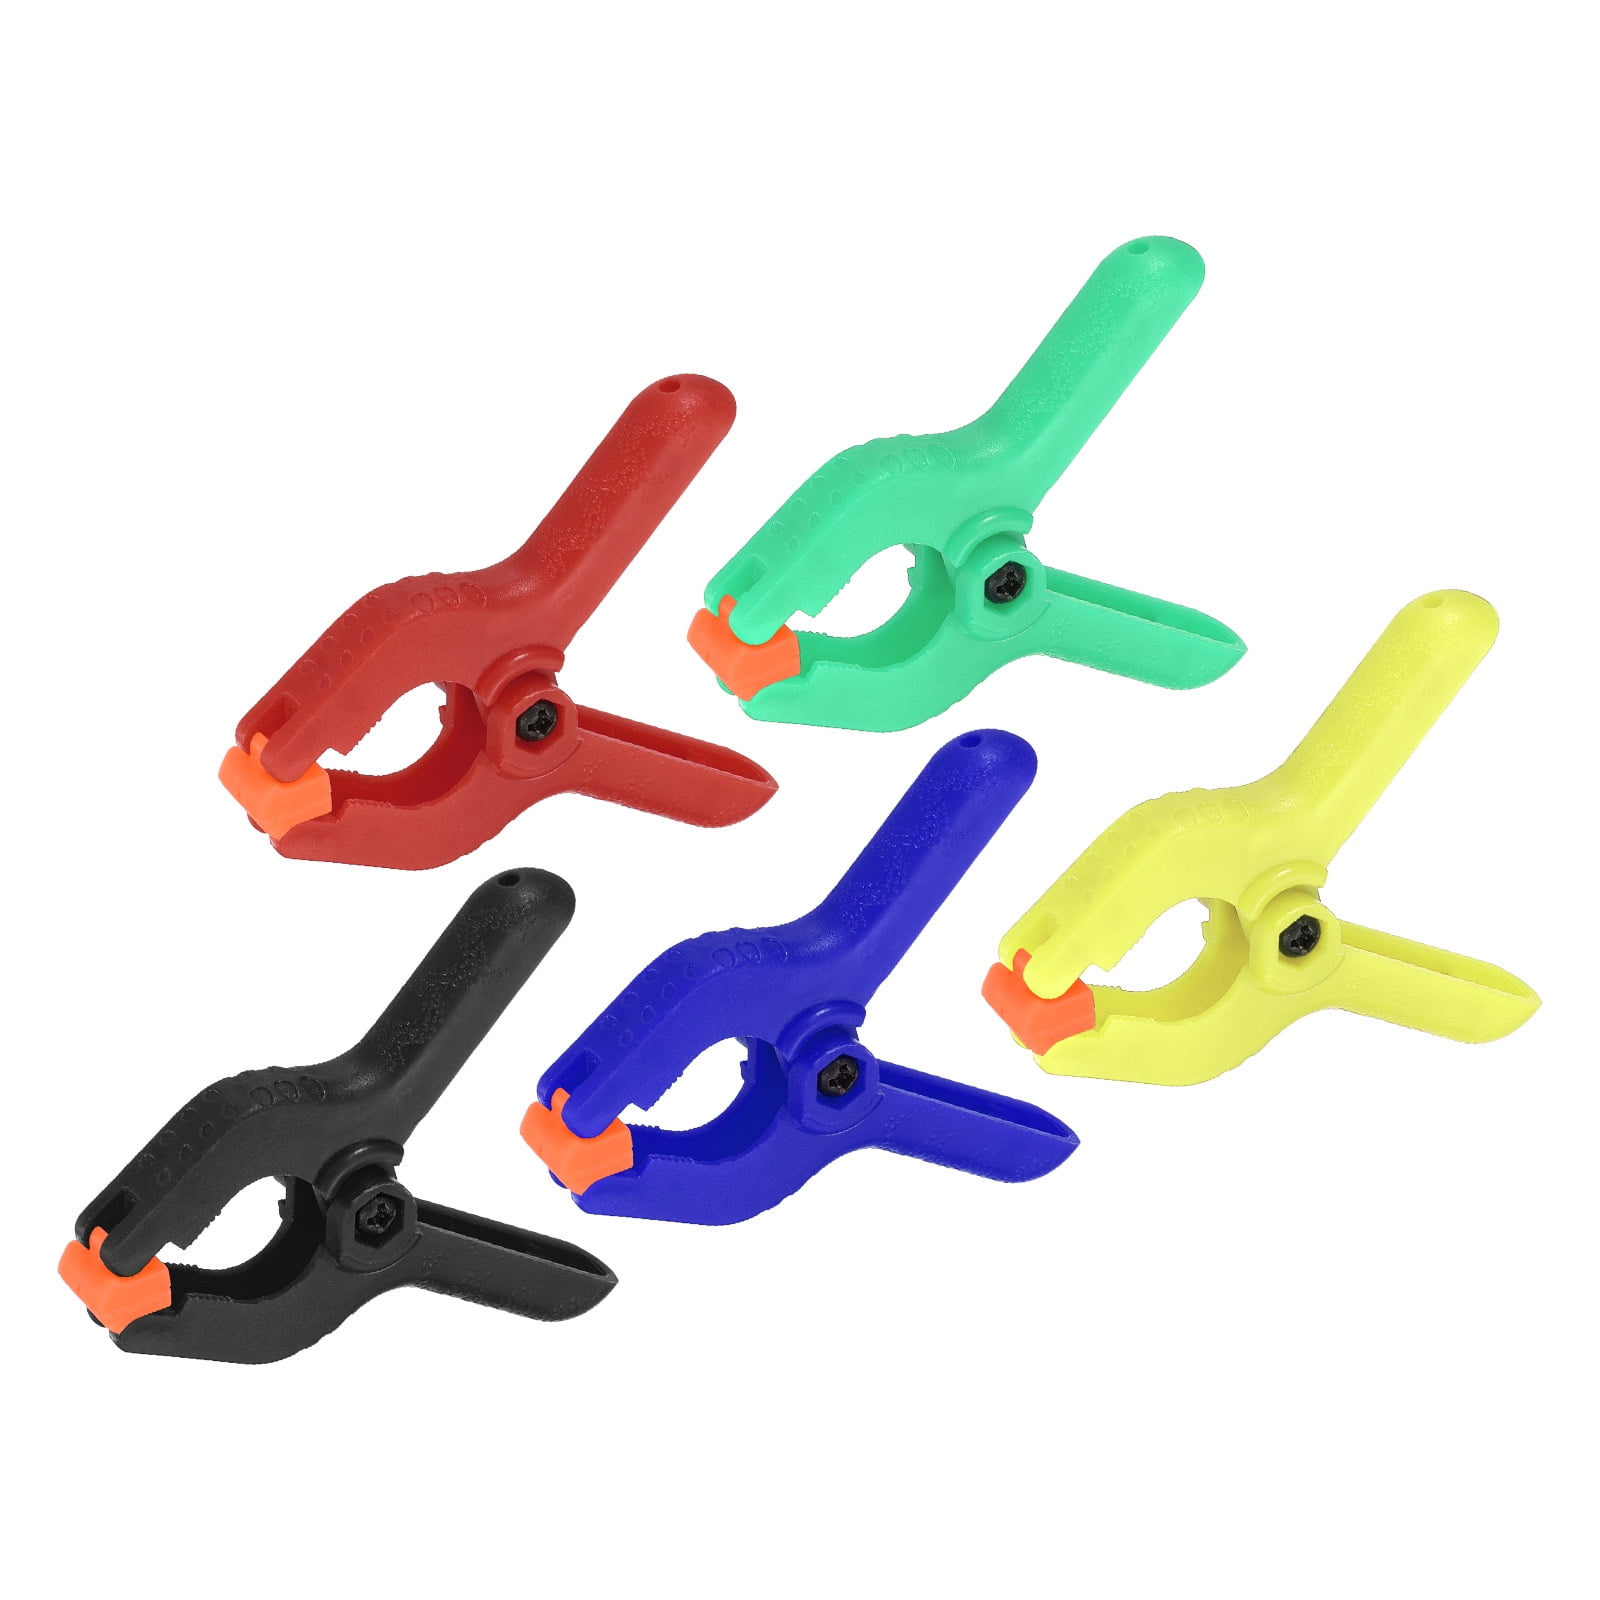 20 Packs 3.5 Heavy Duty Plastic Spring Clamps for Crafts and